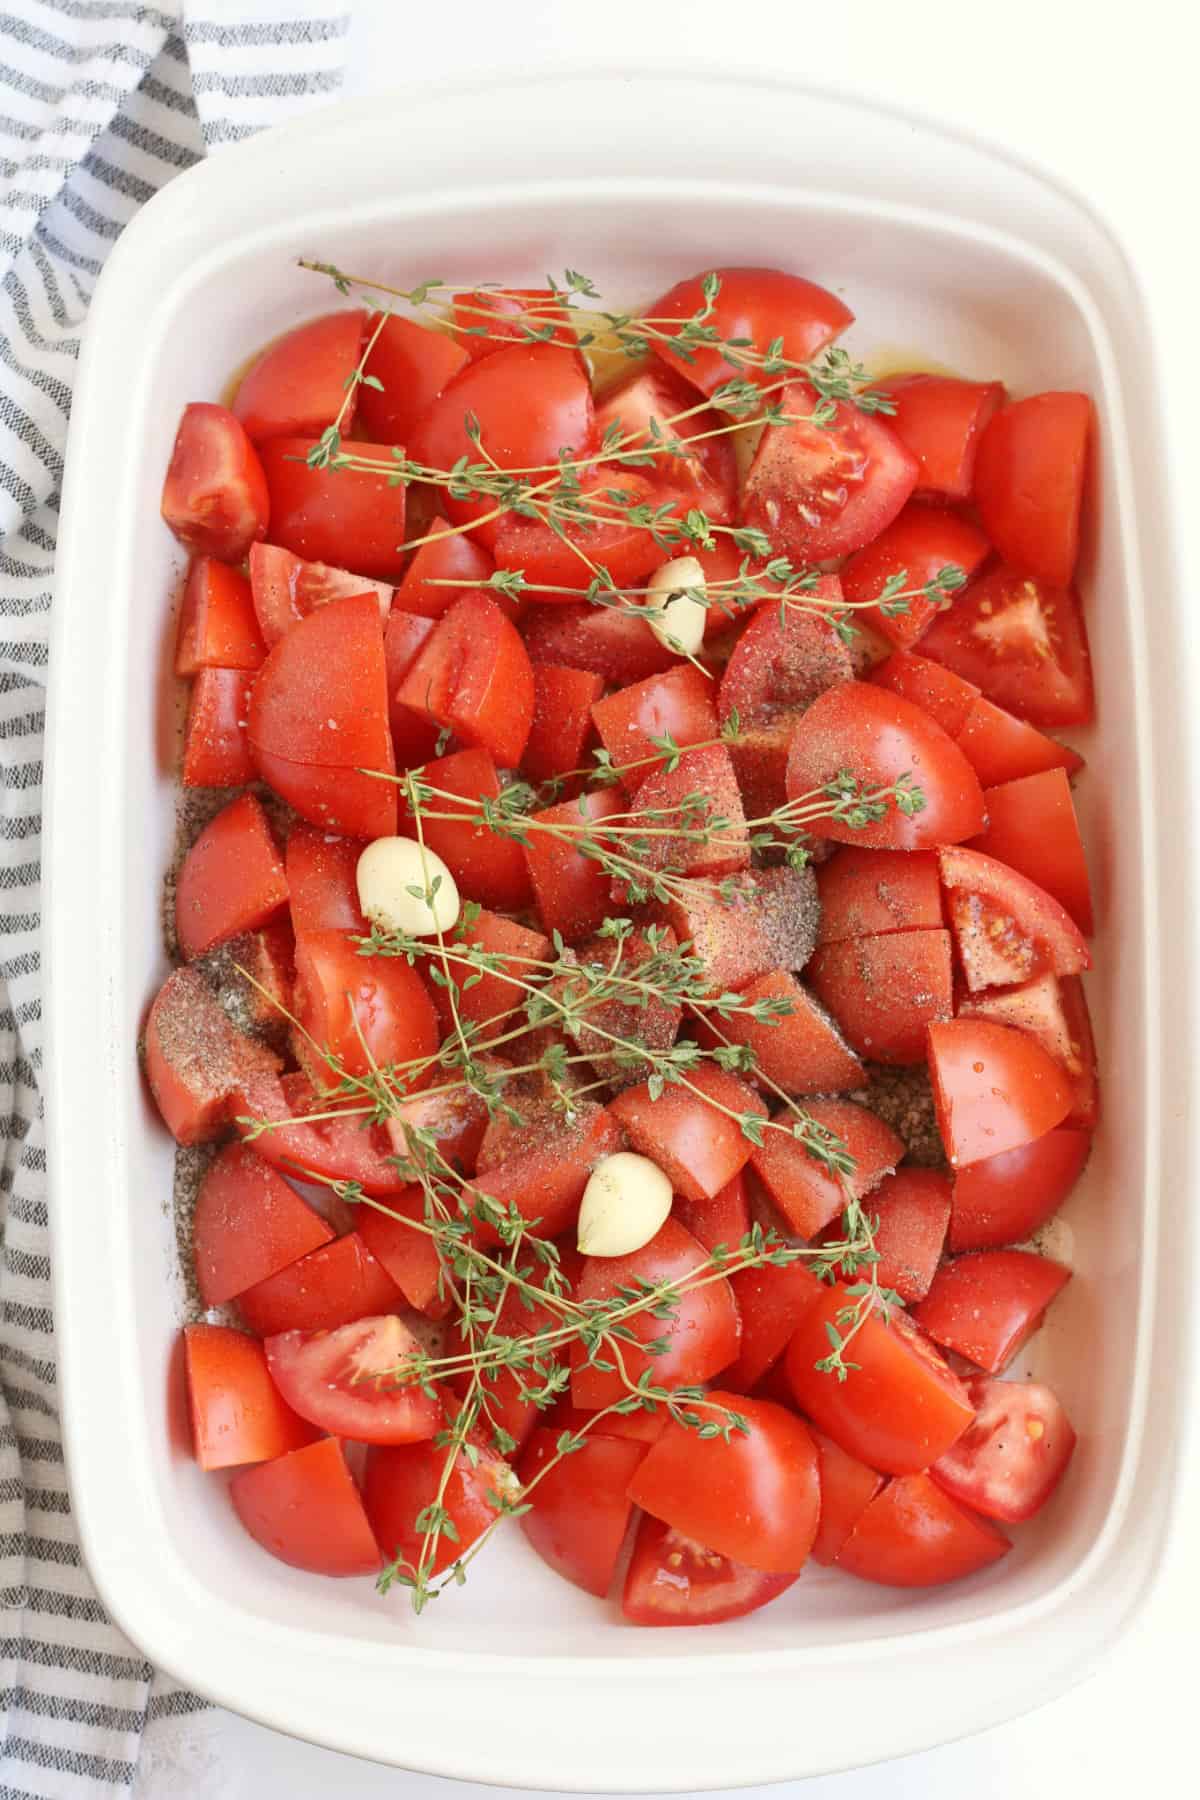 quartered tomatoes and herbs in a baking dish.